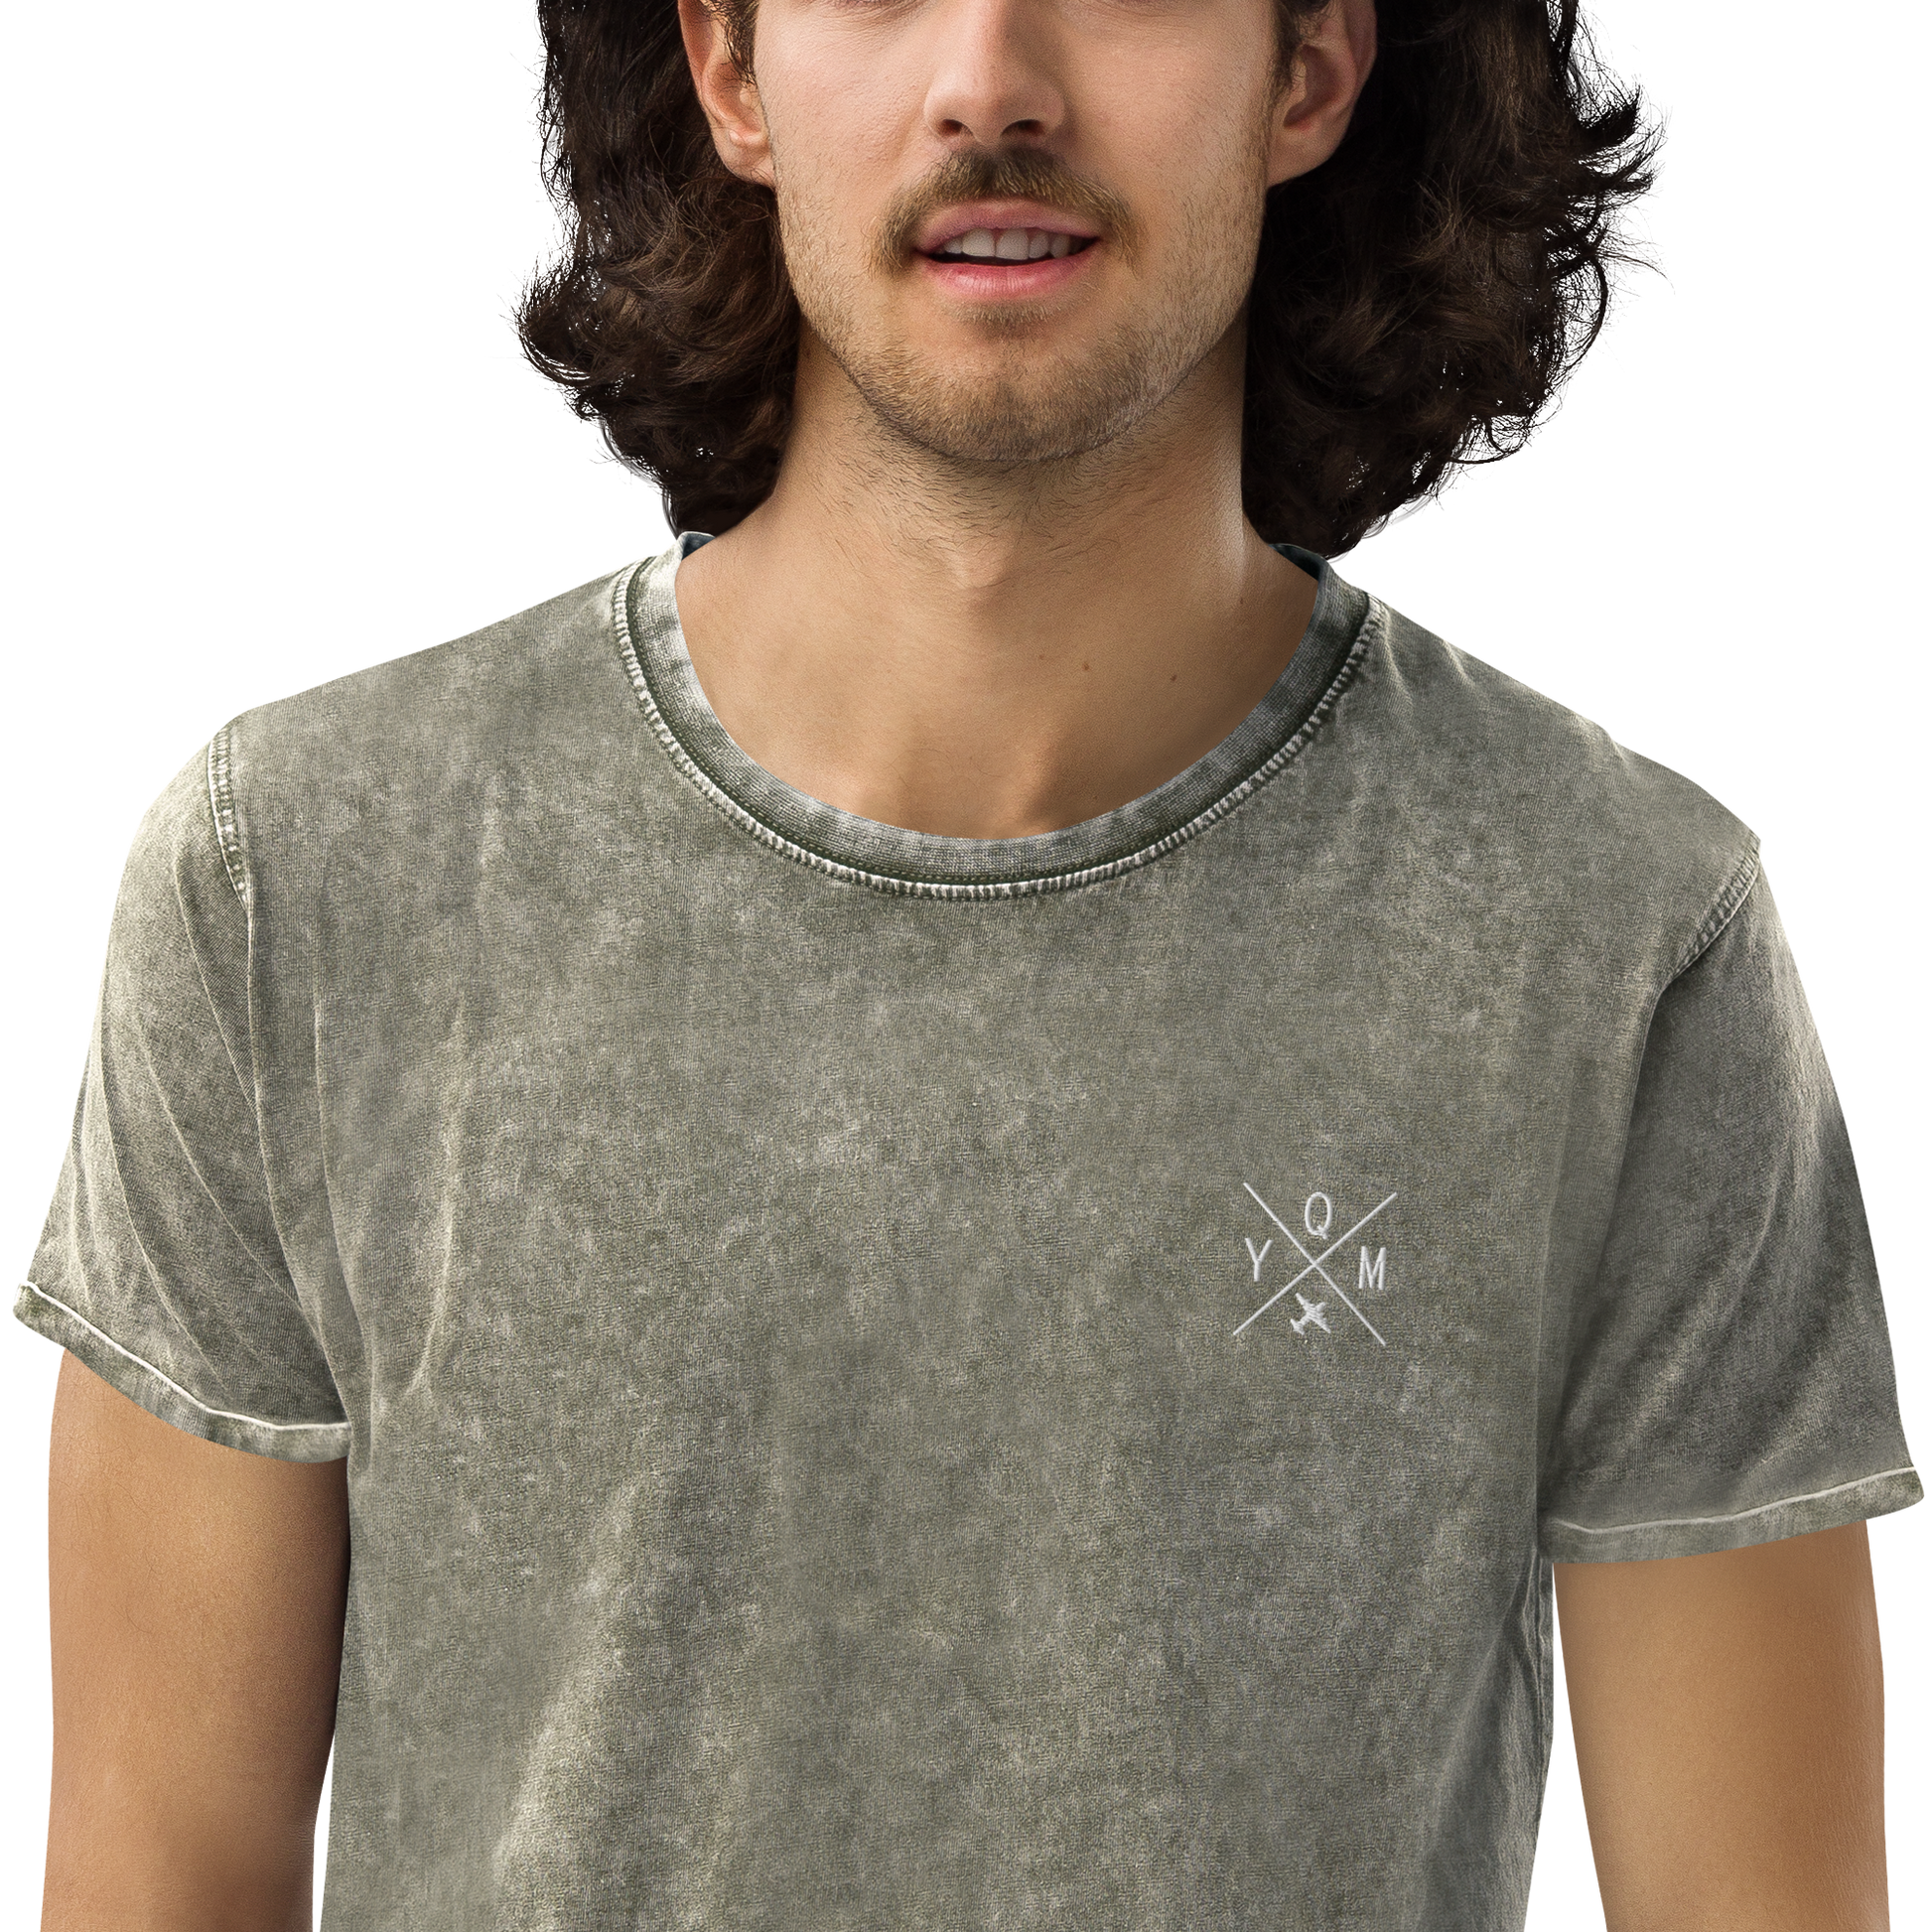 YHM Designs - YQM Moncton Denim T-Shirt - Crossed-X Design with Airport Code and Vintage Propliner - White Embroidery - Image 11